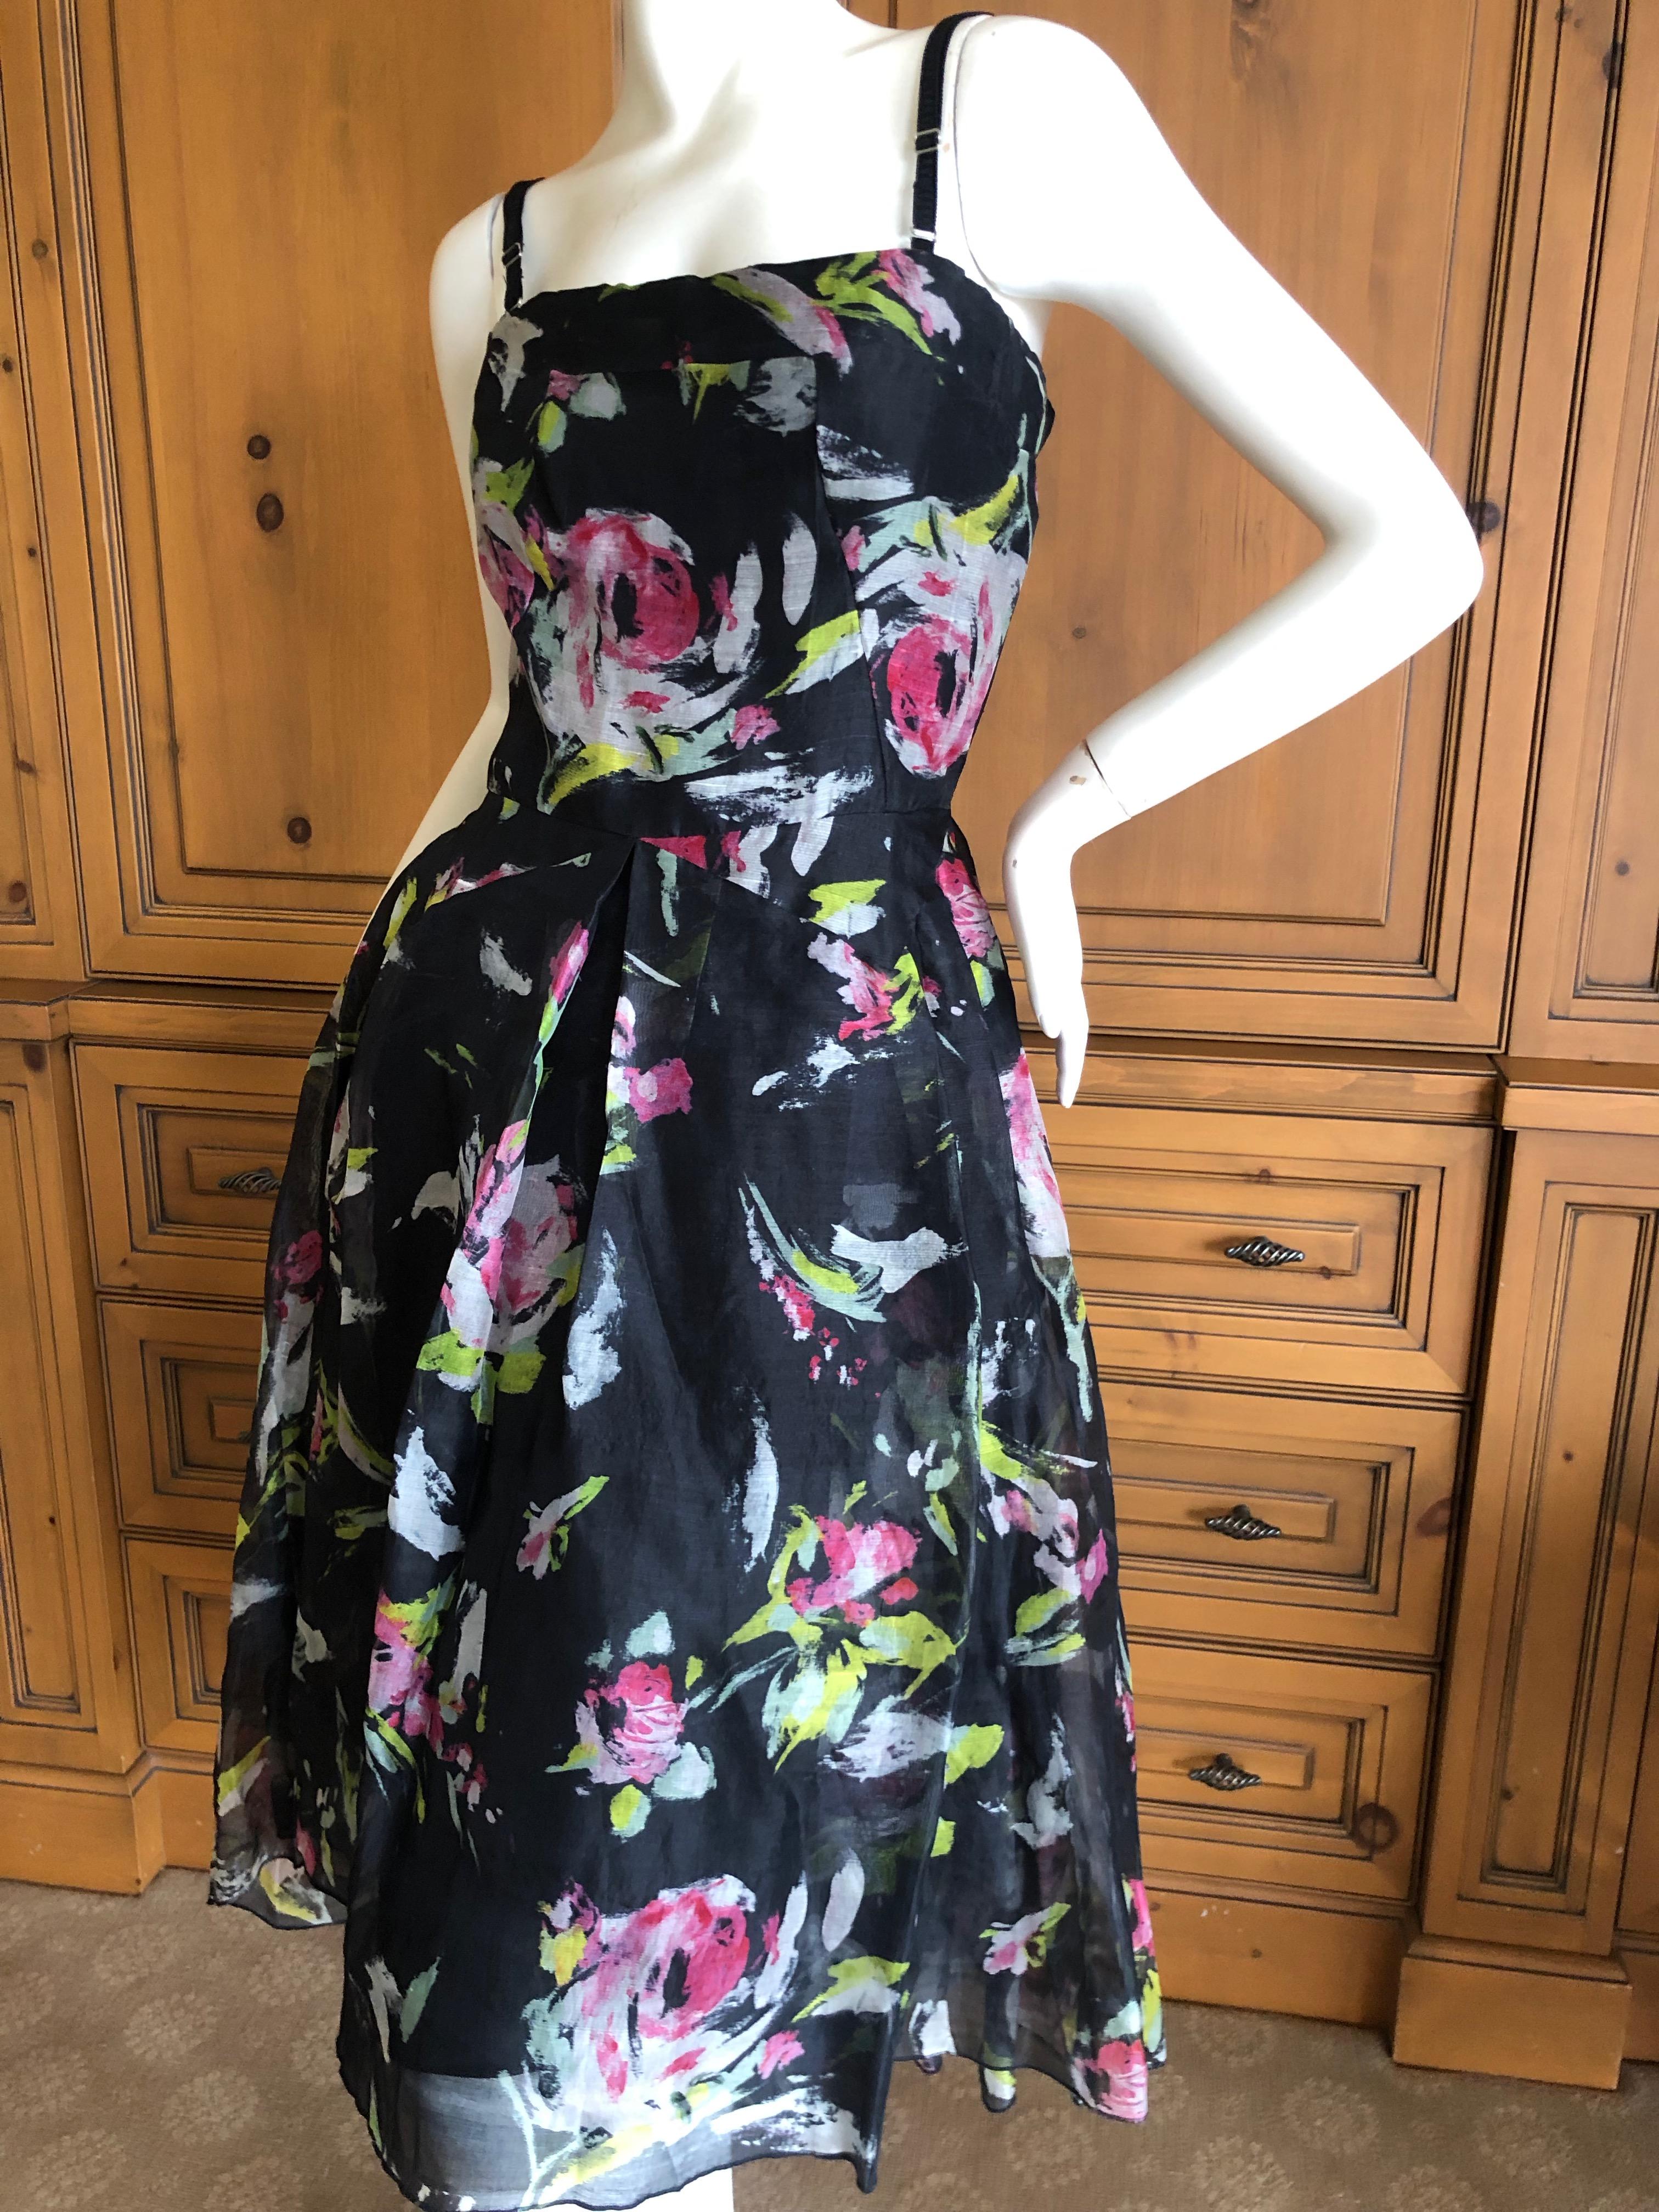   D&G by Dolce & Gabbana Black Silk Floral Vintage 1950's Style Cocktail Dress
 Zips up the back. So sexy.Full inner corset
Straps are detachable
Size 44, but runs small

Bust 34